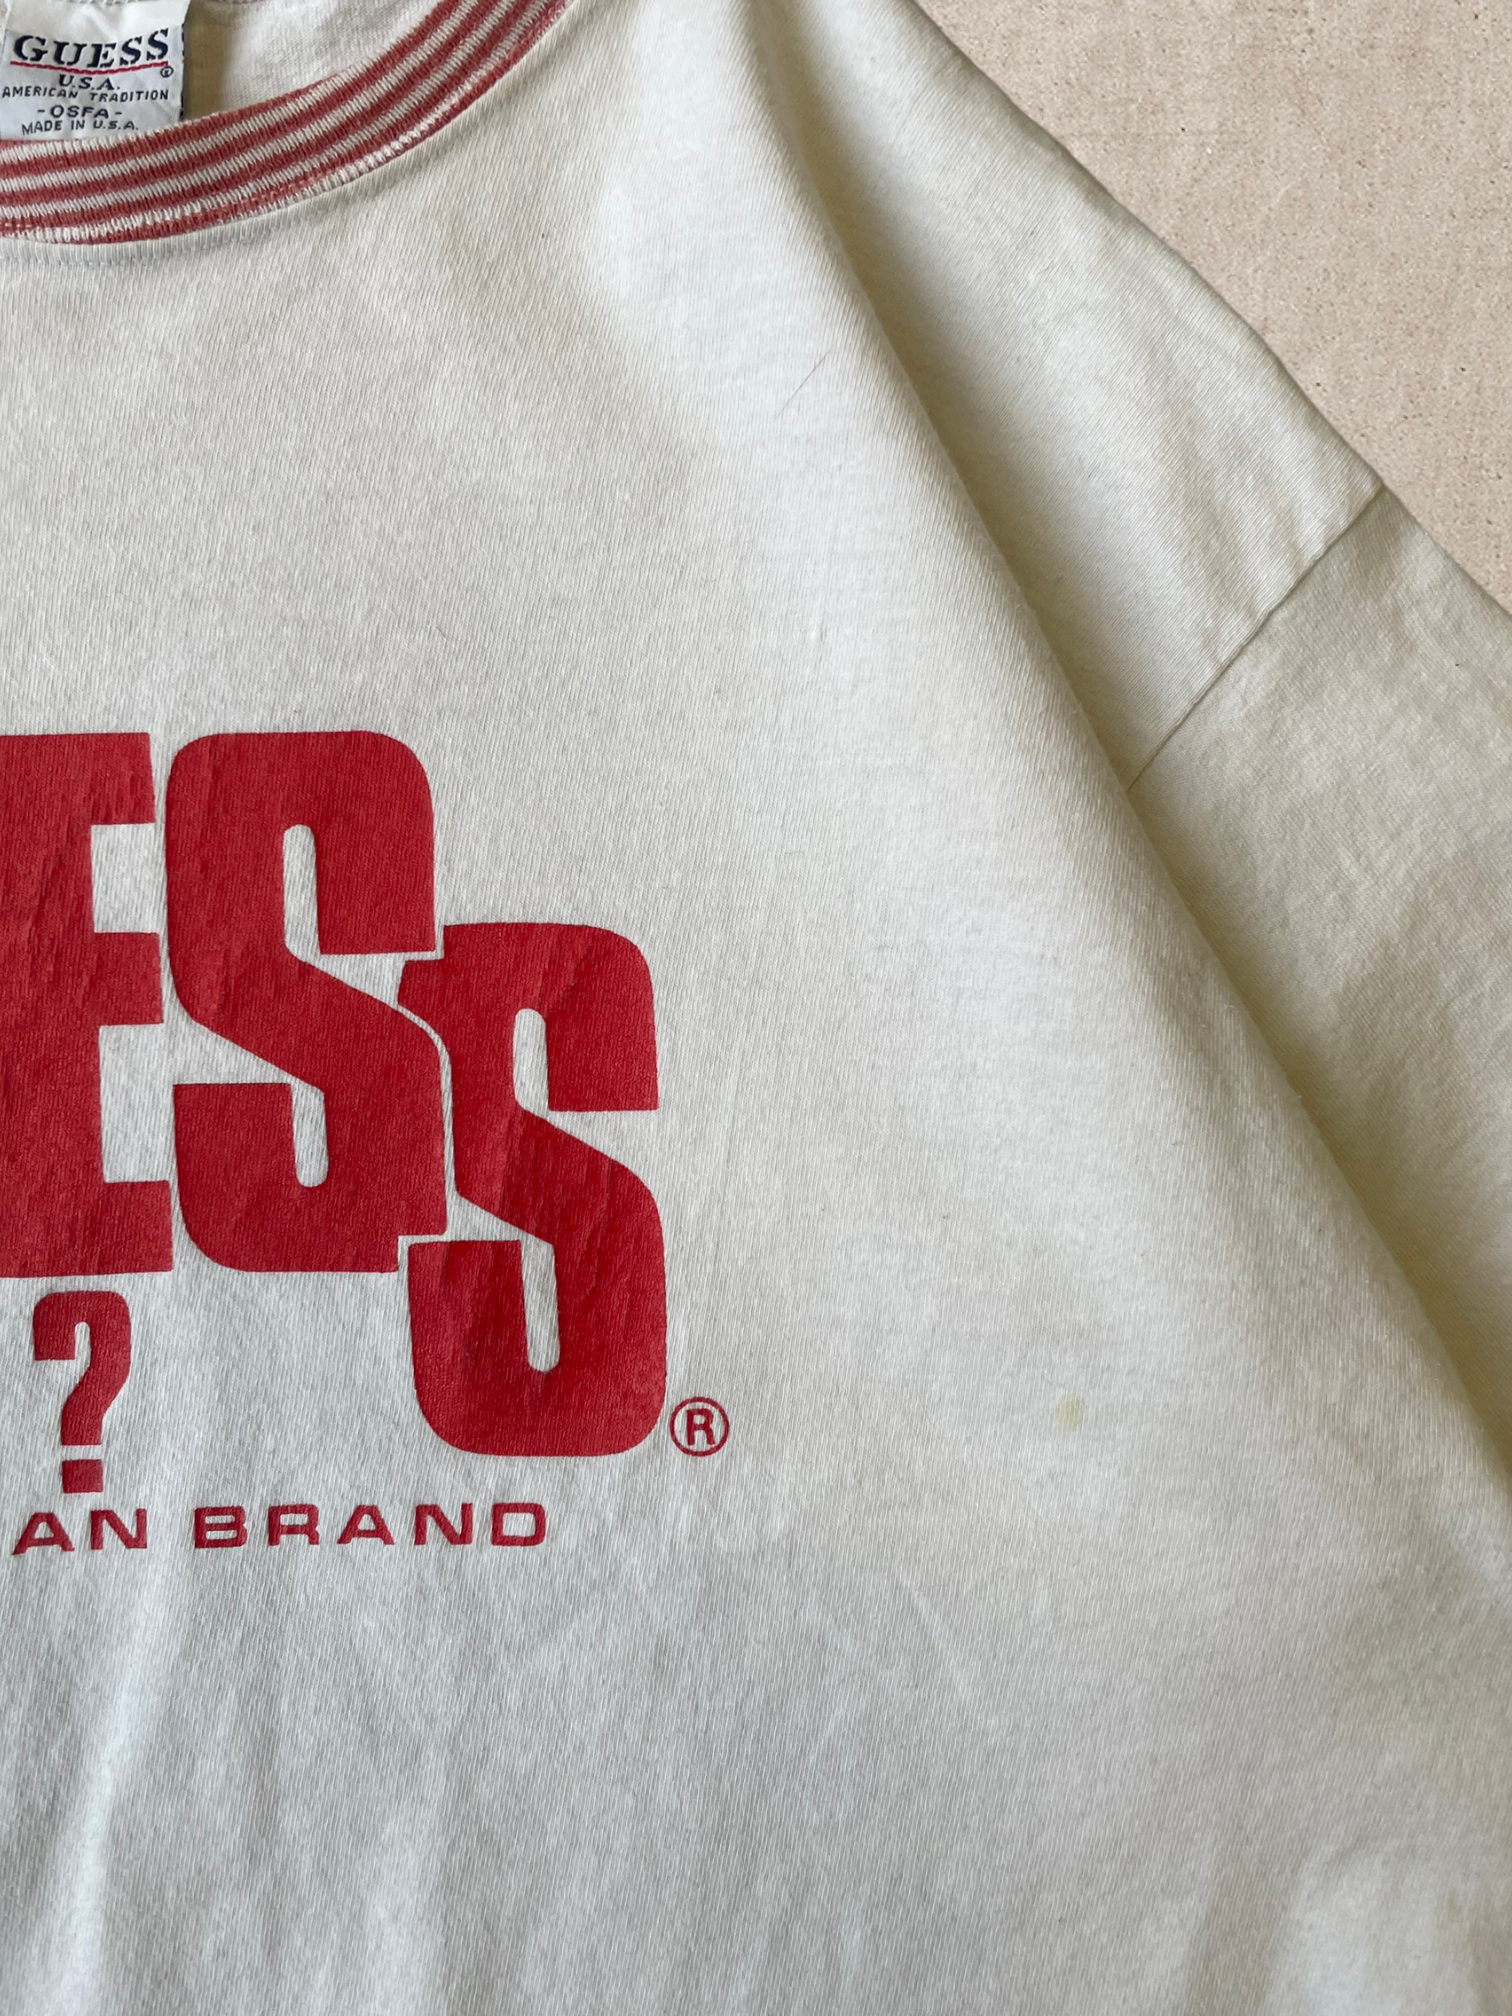 90s Guess Graphic T-Shirt - Large